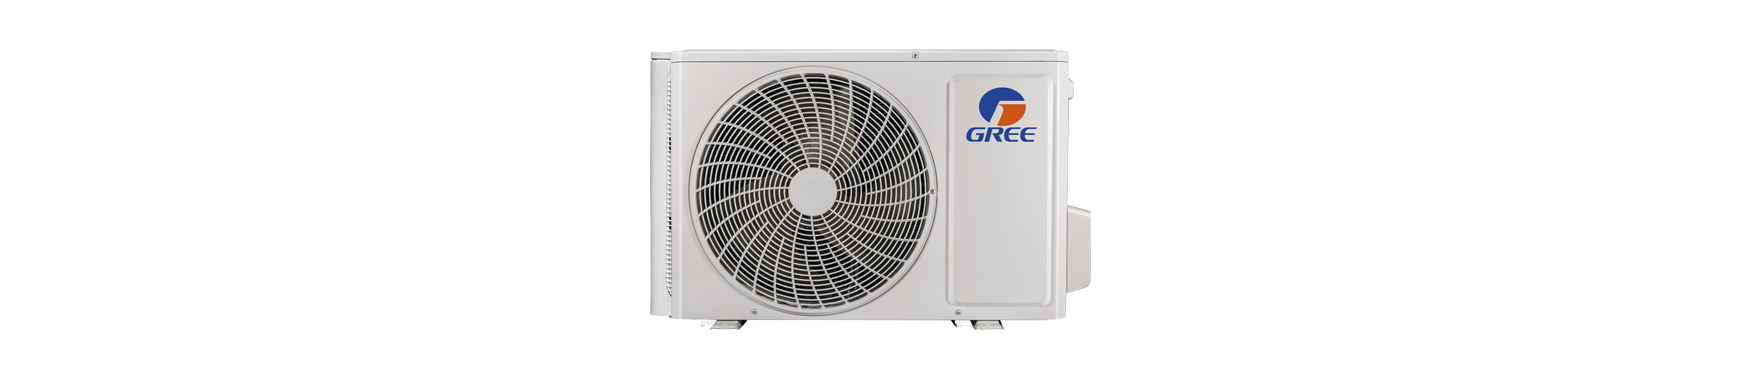 GREE Comfort Vireo R32 single-zone heating and cooling unit